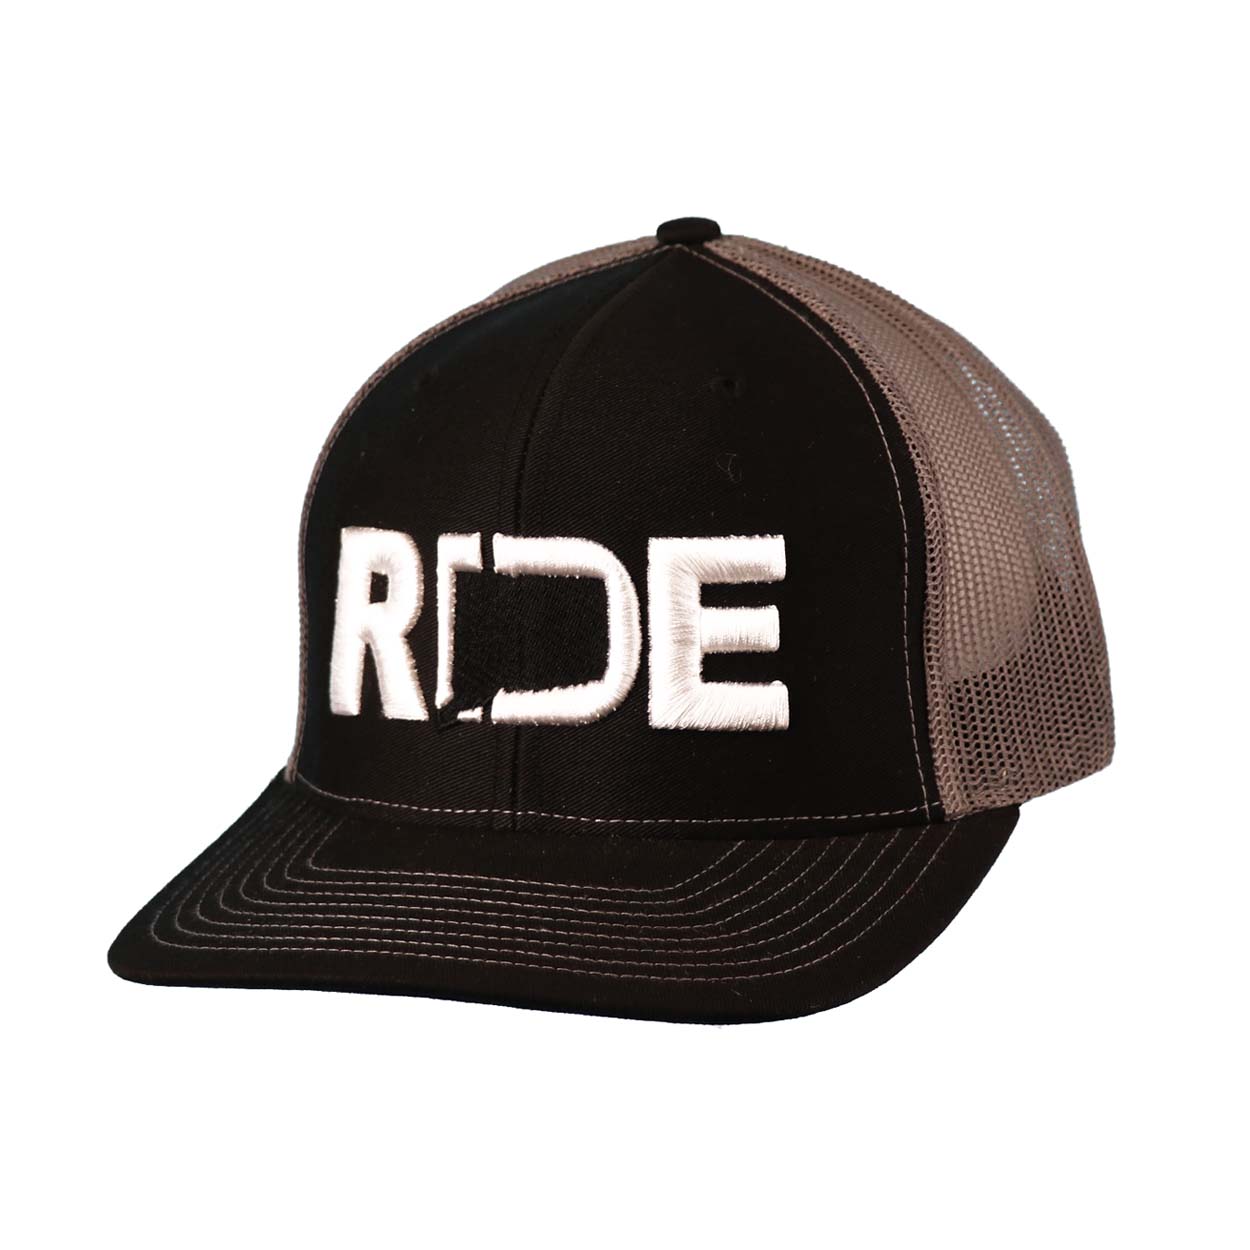 Ride Connecticut Classic Embroidered Snapback Trucker Hat Black/Gray